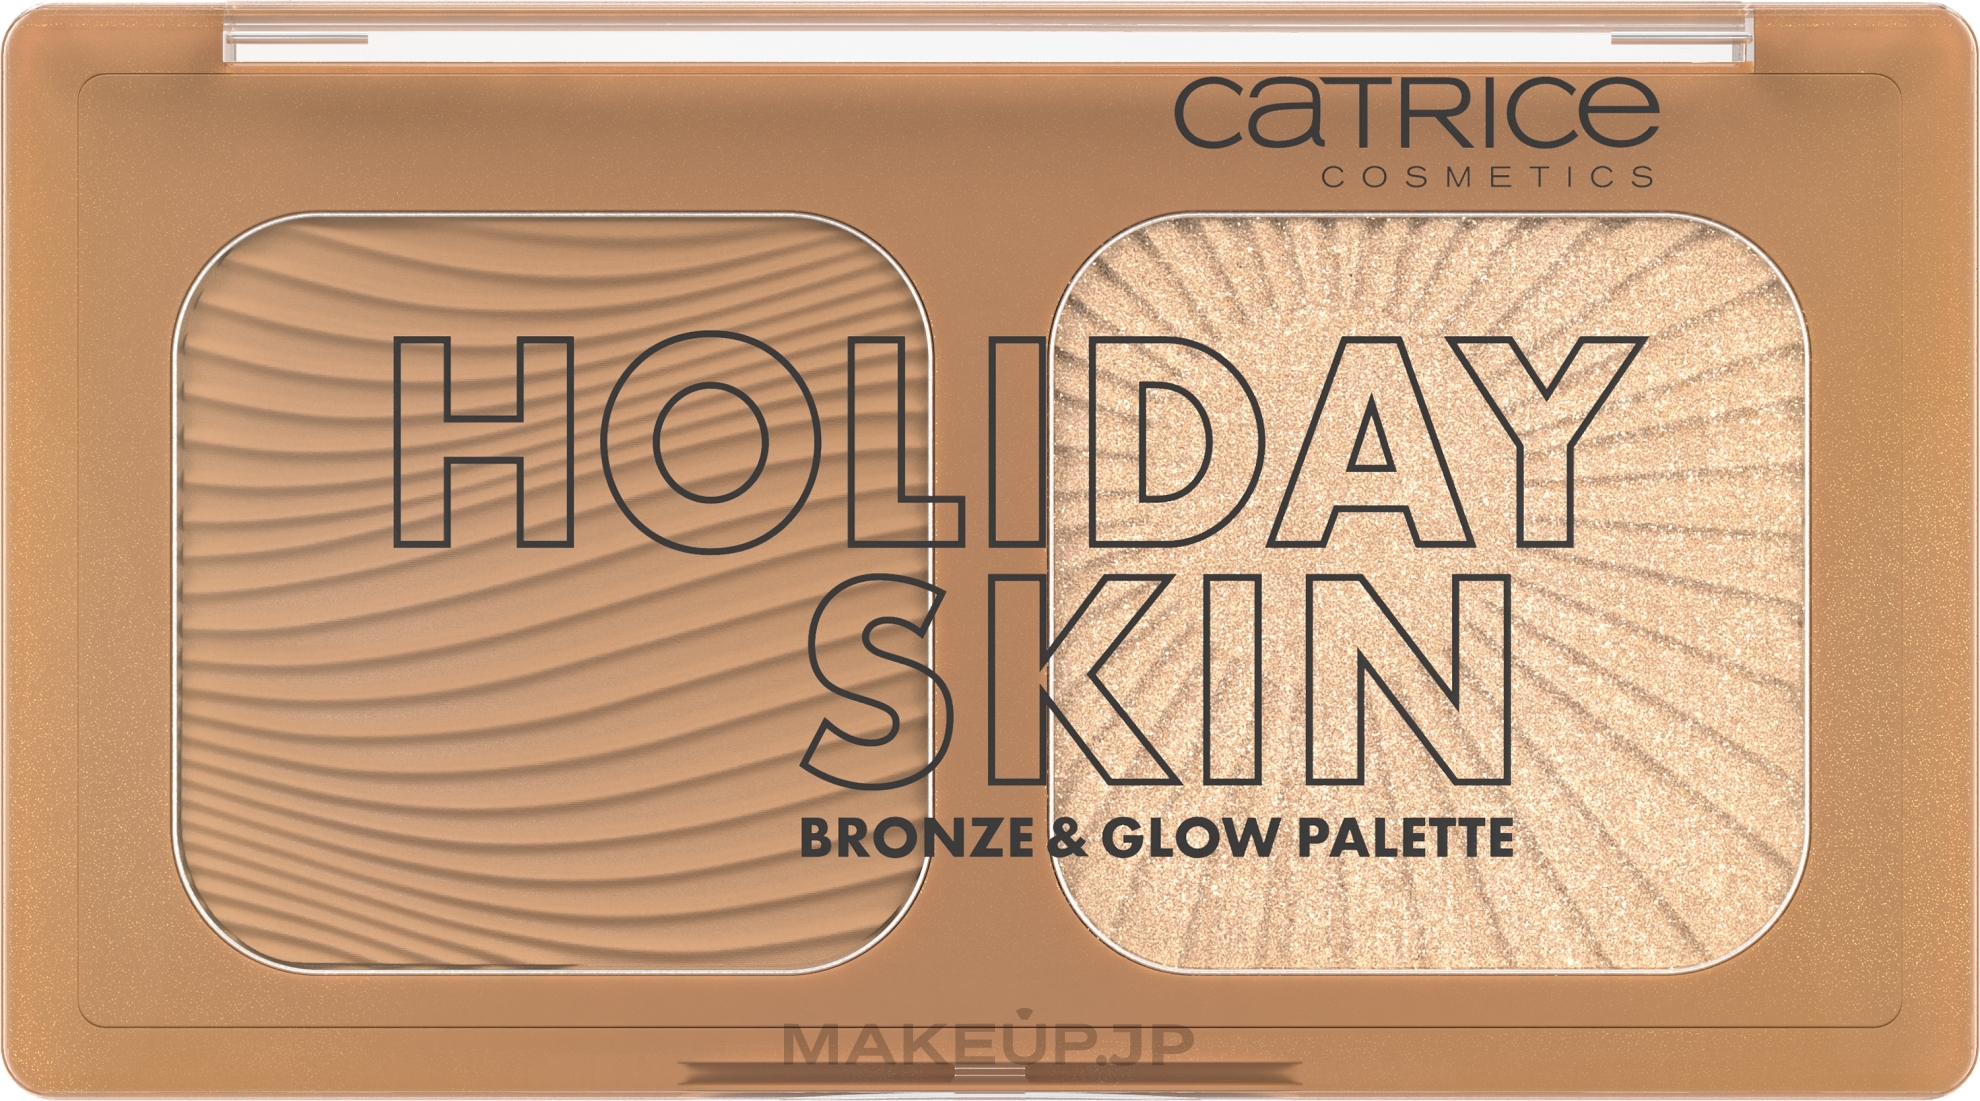 Contouring Palette - Catrice Bronze & Glow Palette Holiday Skin — photo 5.5 g